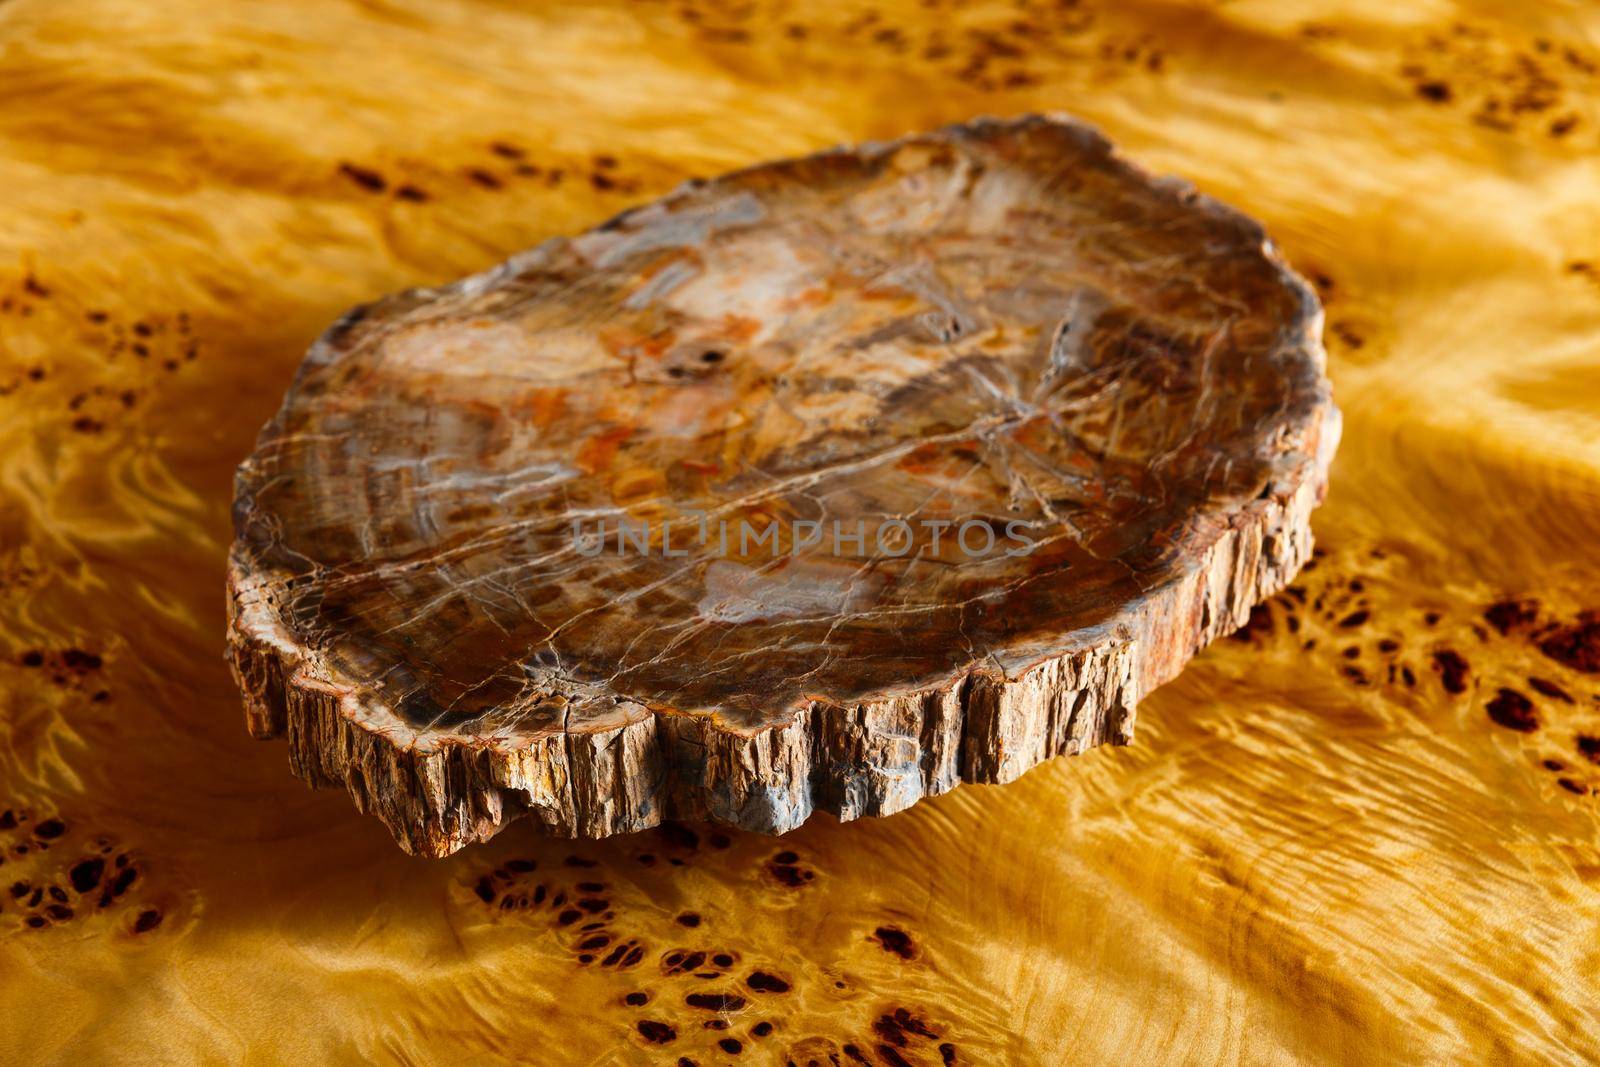 A section of ancient petrified wood, polished and impregnated with epoxy resin, is used as tray to decorate the interior of a home or office.